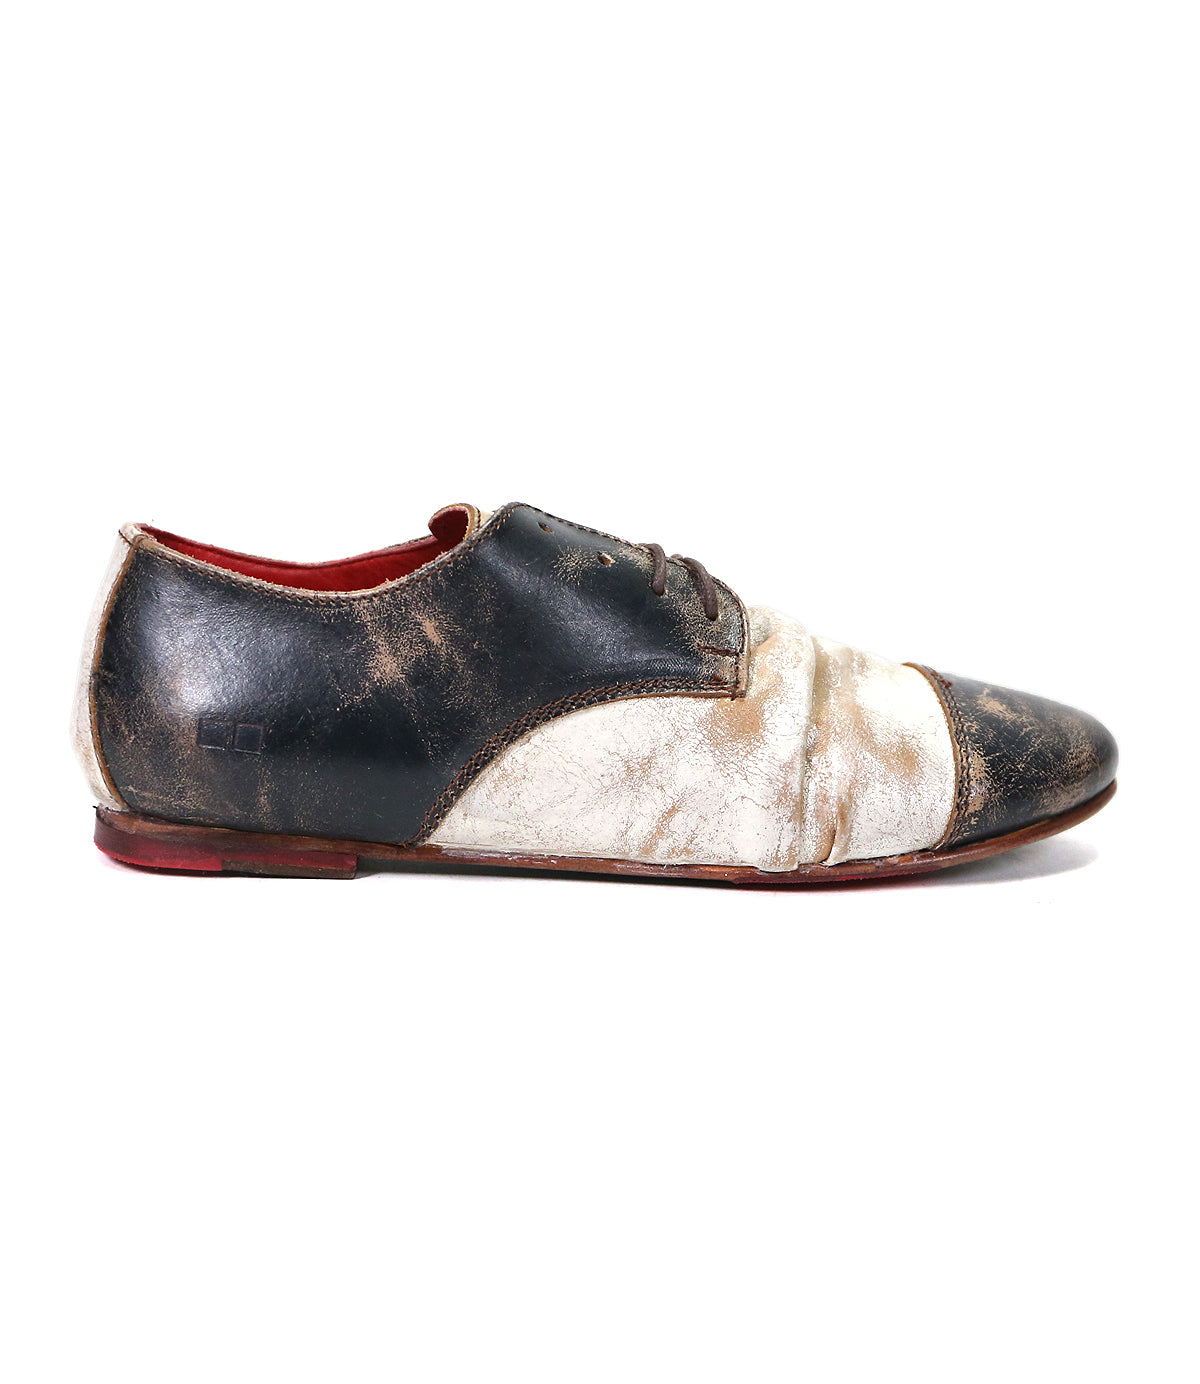 Single worn-out Bed Stu Rumba II black and white leather shoe with red interior, 1920s wingtip design, isolated on a white background.